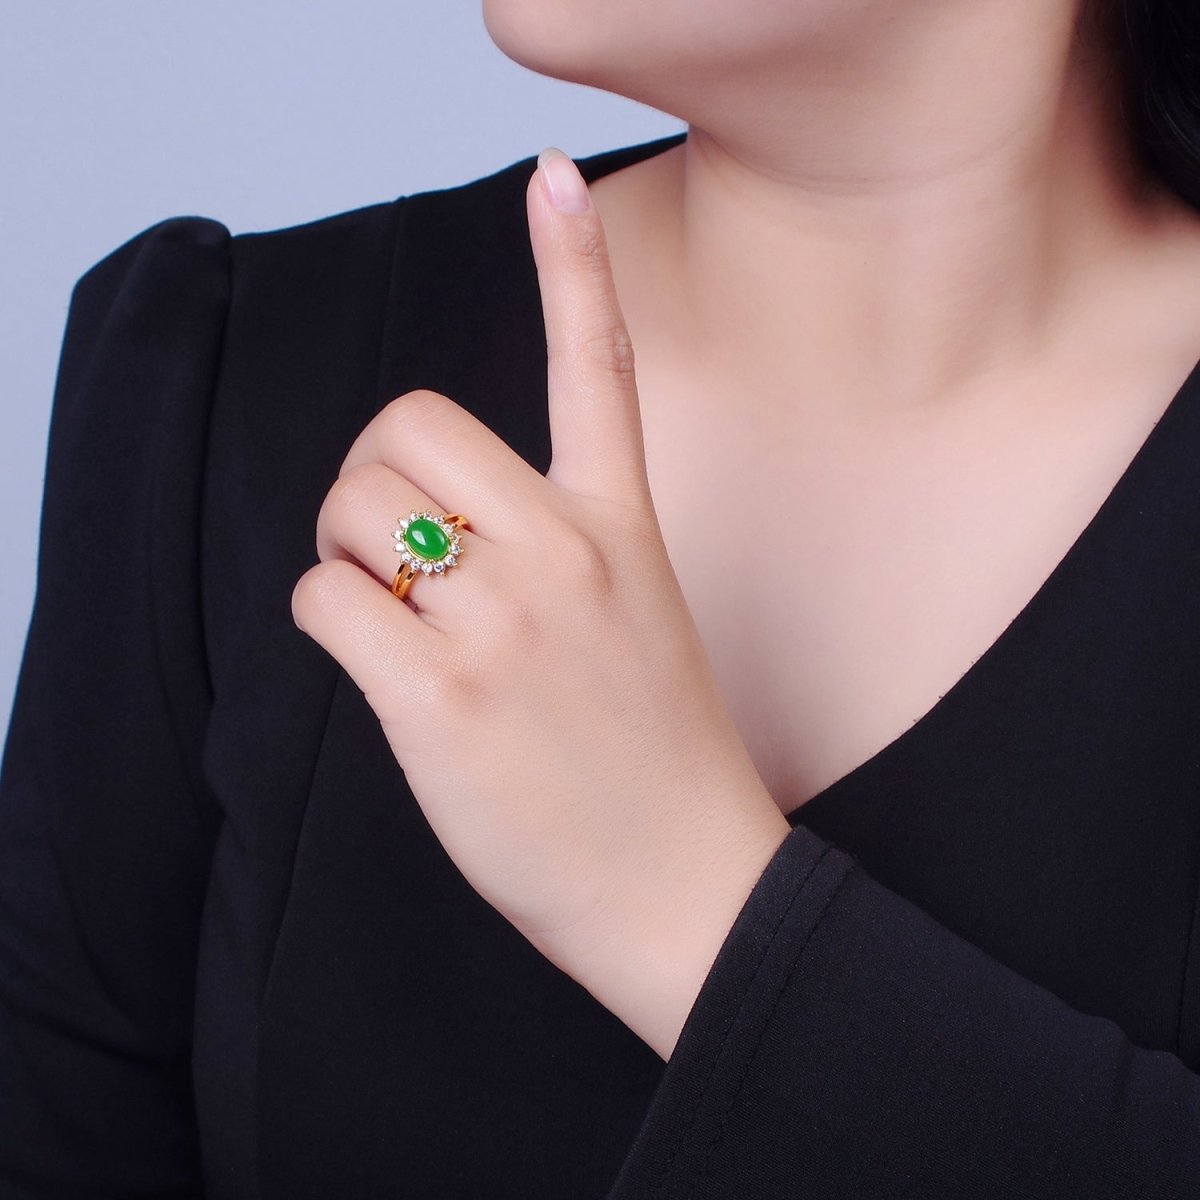 24K Gold Filled Celestial Sun Ring with Oval Green Jade Stone O-763 - DLUXCA